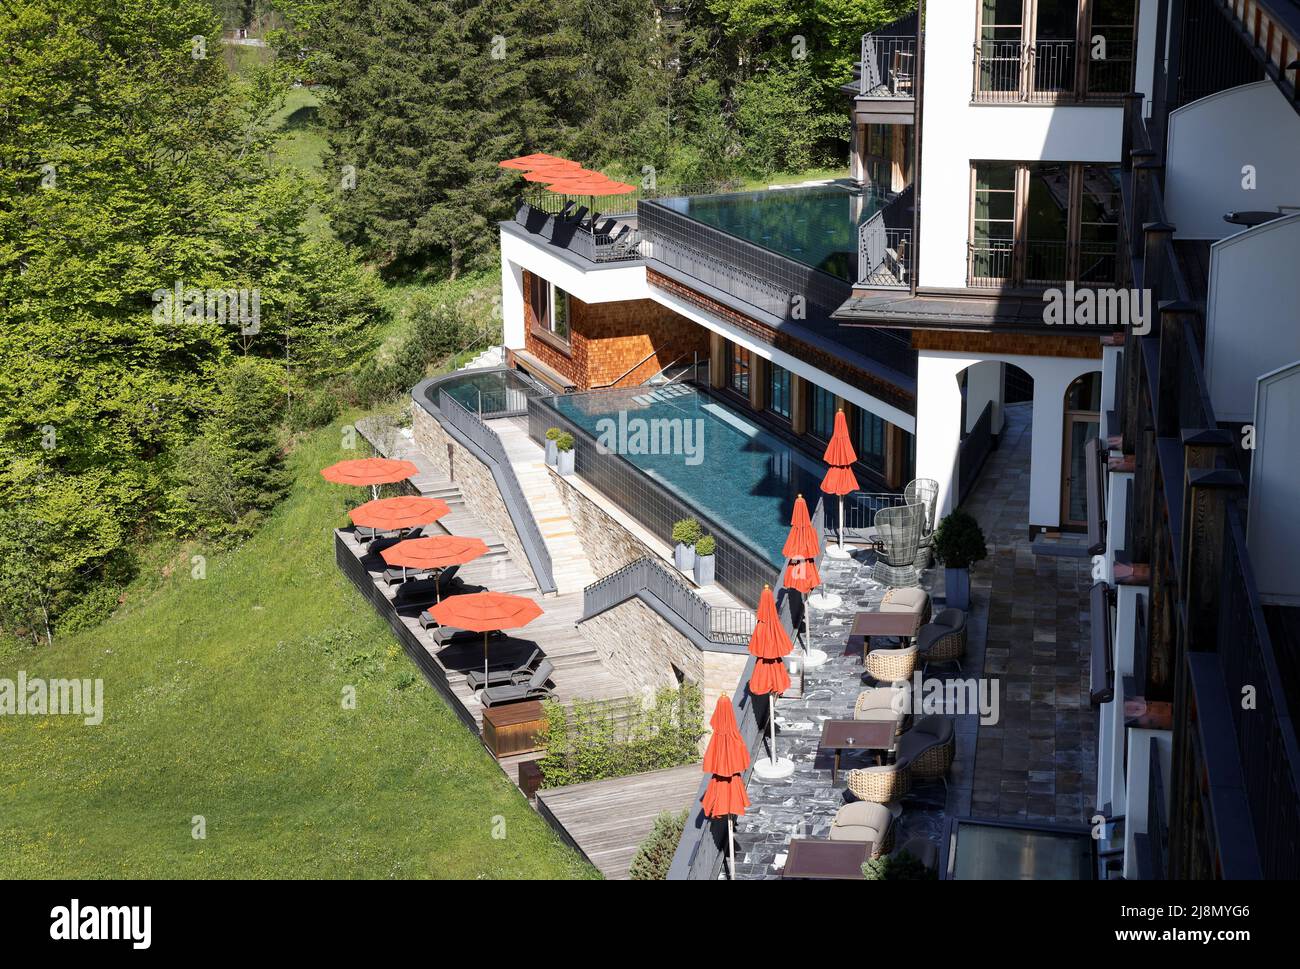 A general view shows the area around the hotel Castle Elmau, where the G7 Summit will be held in June 2022, in Kruen, near the southern Bavarian resort of Garmisch-Partenkirchen, Germany, May 17, 2022. REUTERS/Michaela Rehle Stock Photo